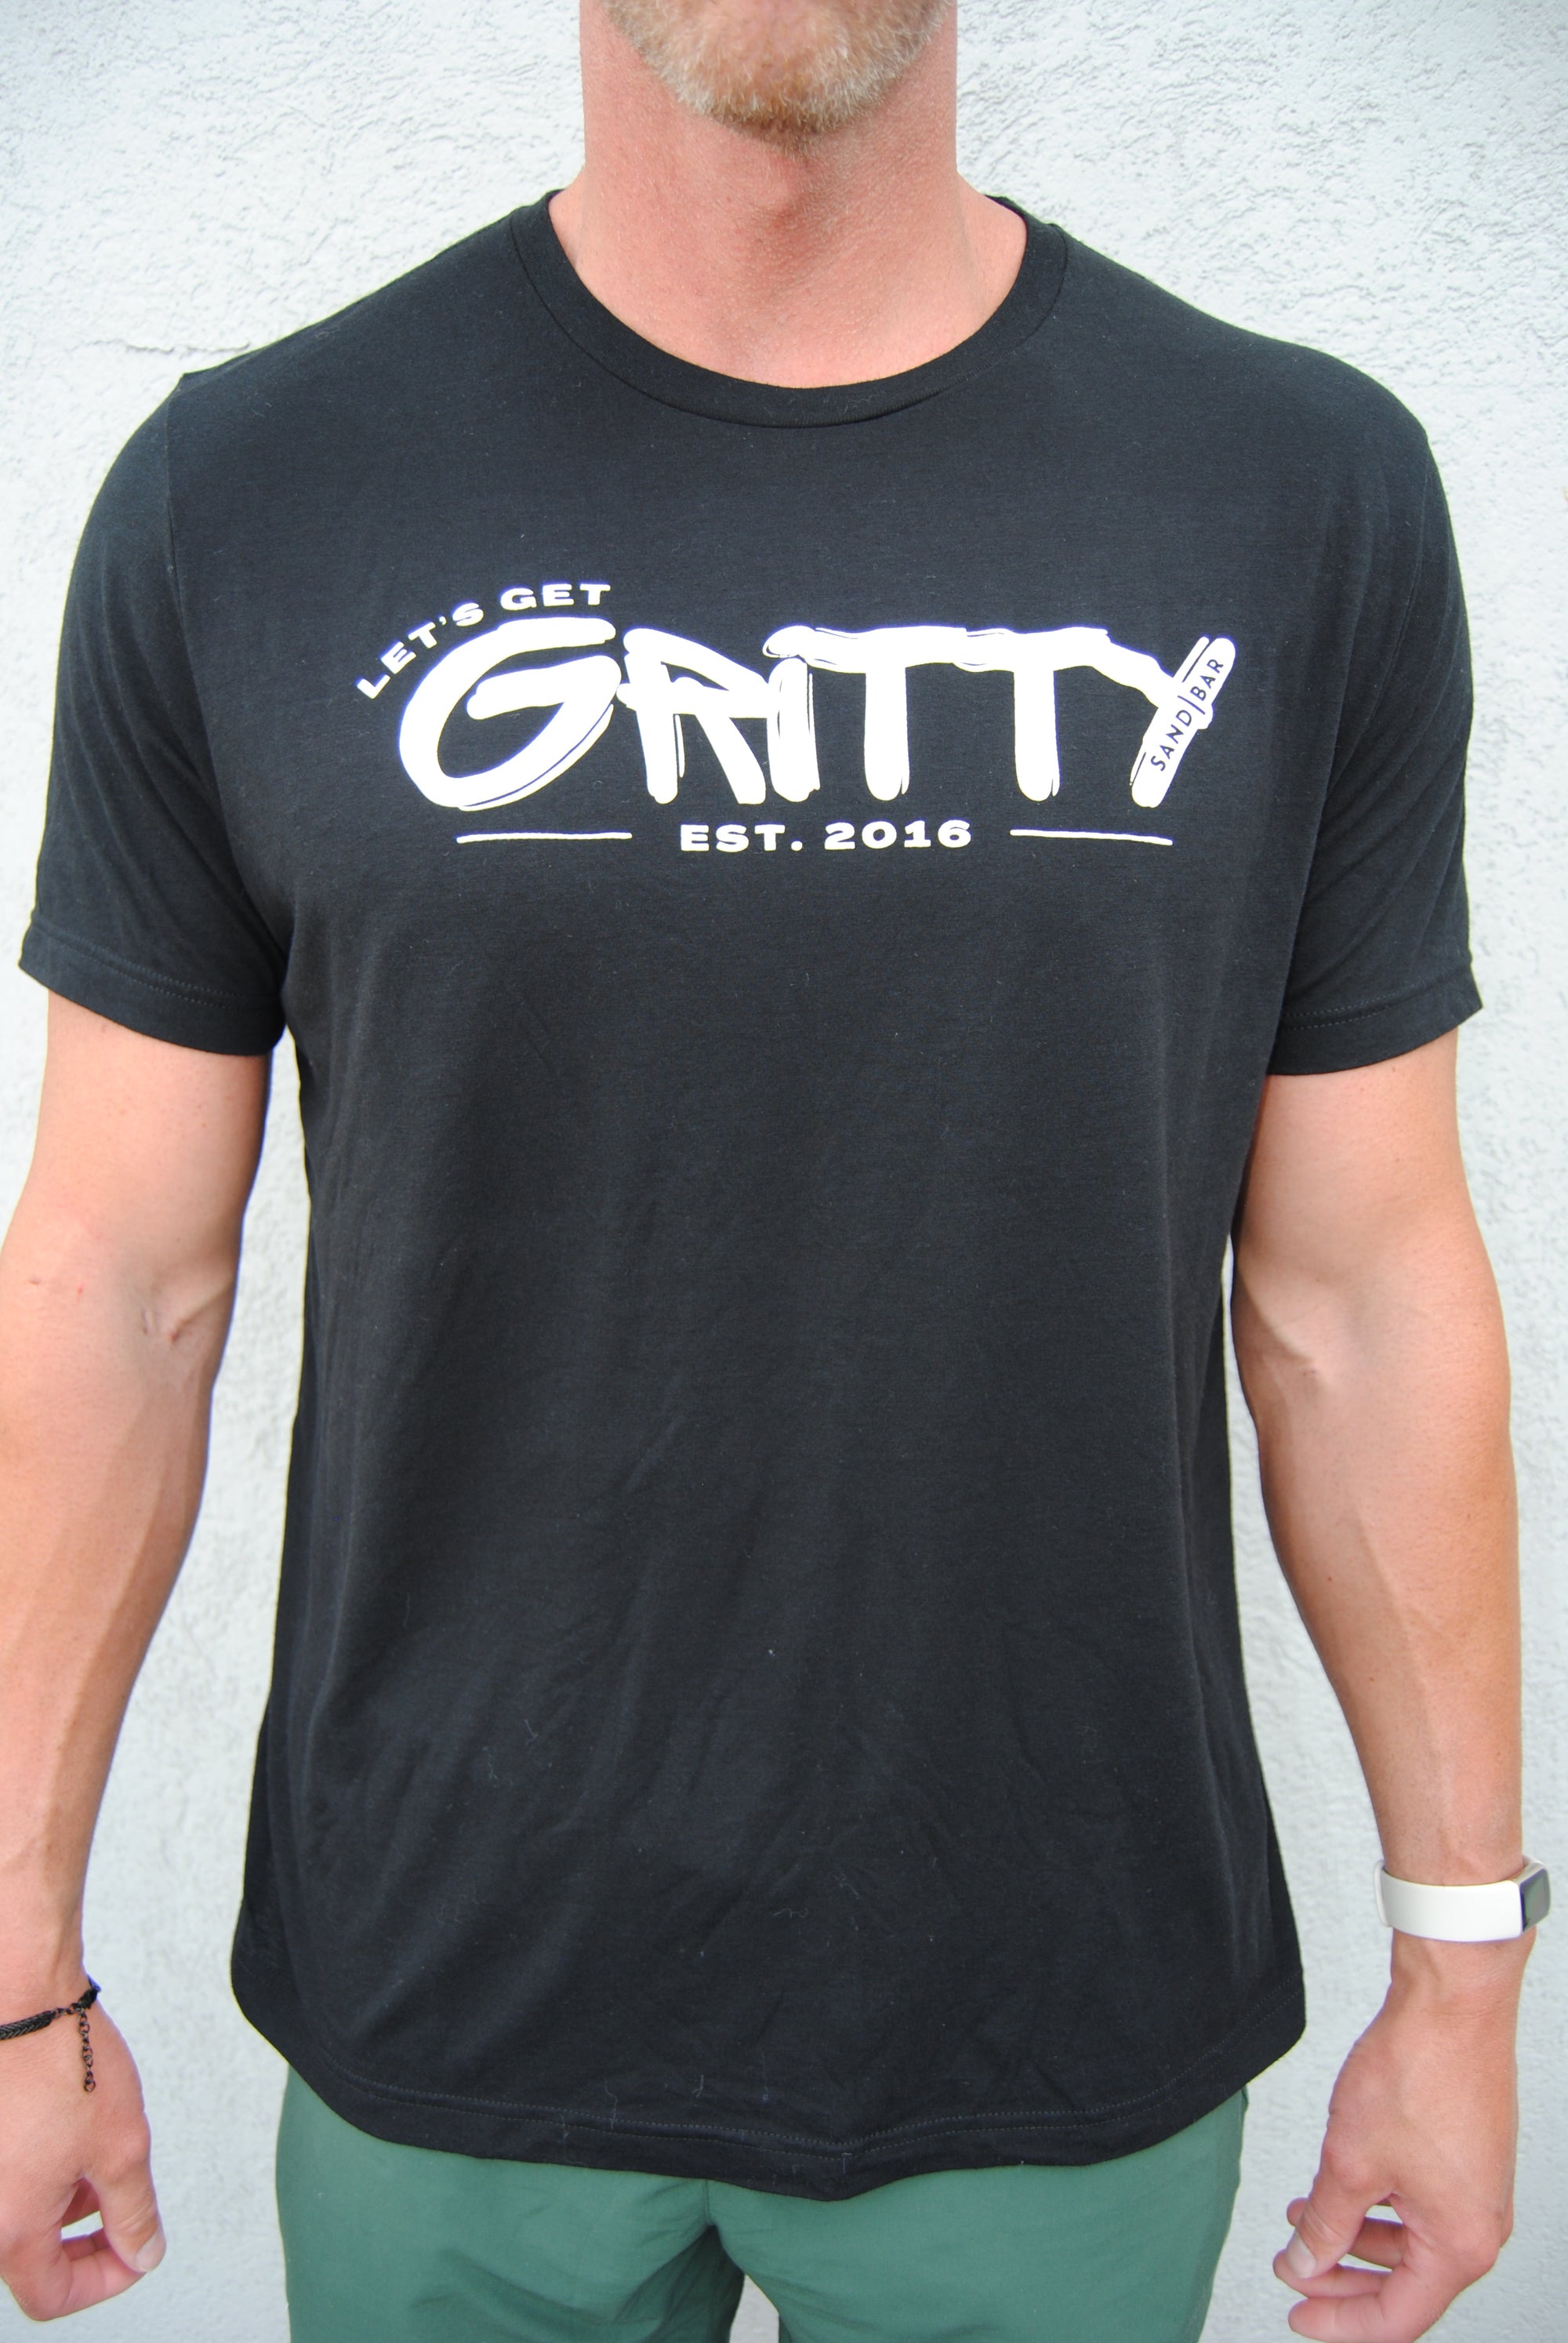 Let's Get Gritty T-Shirt